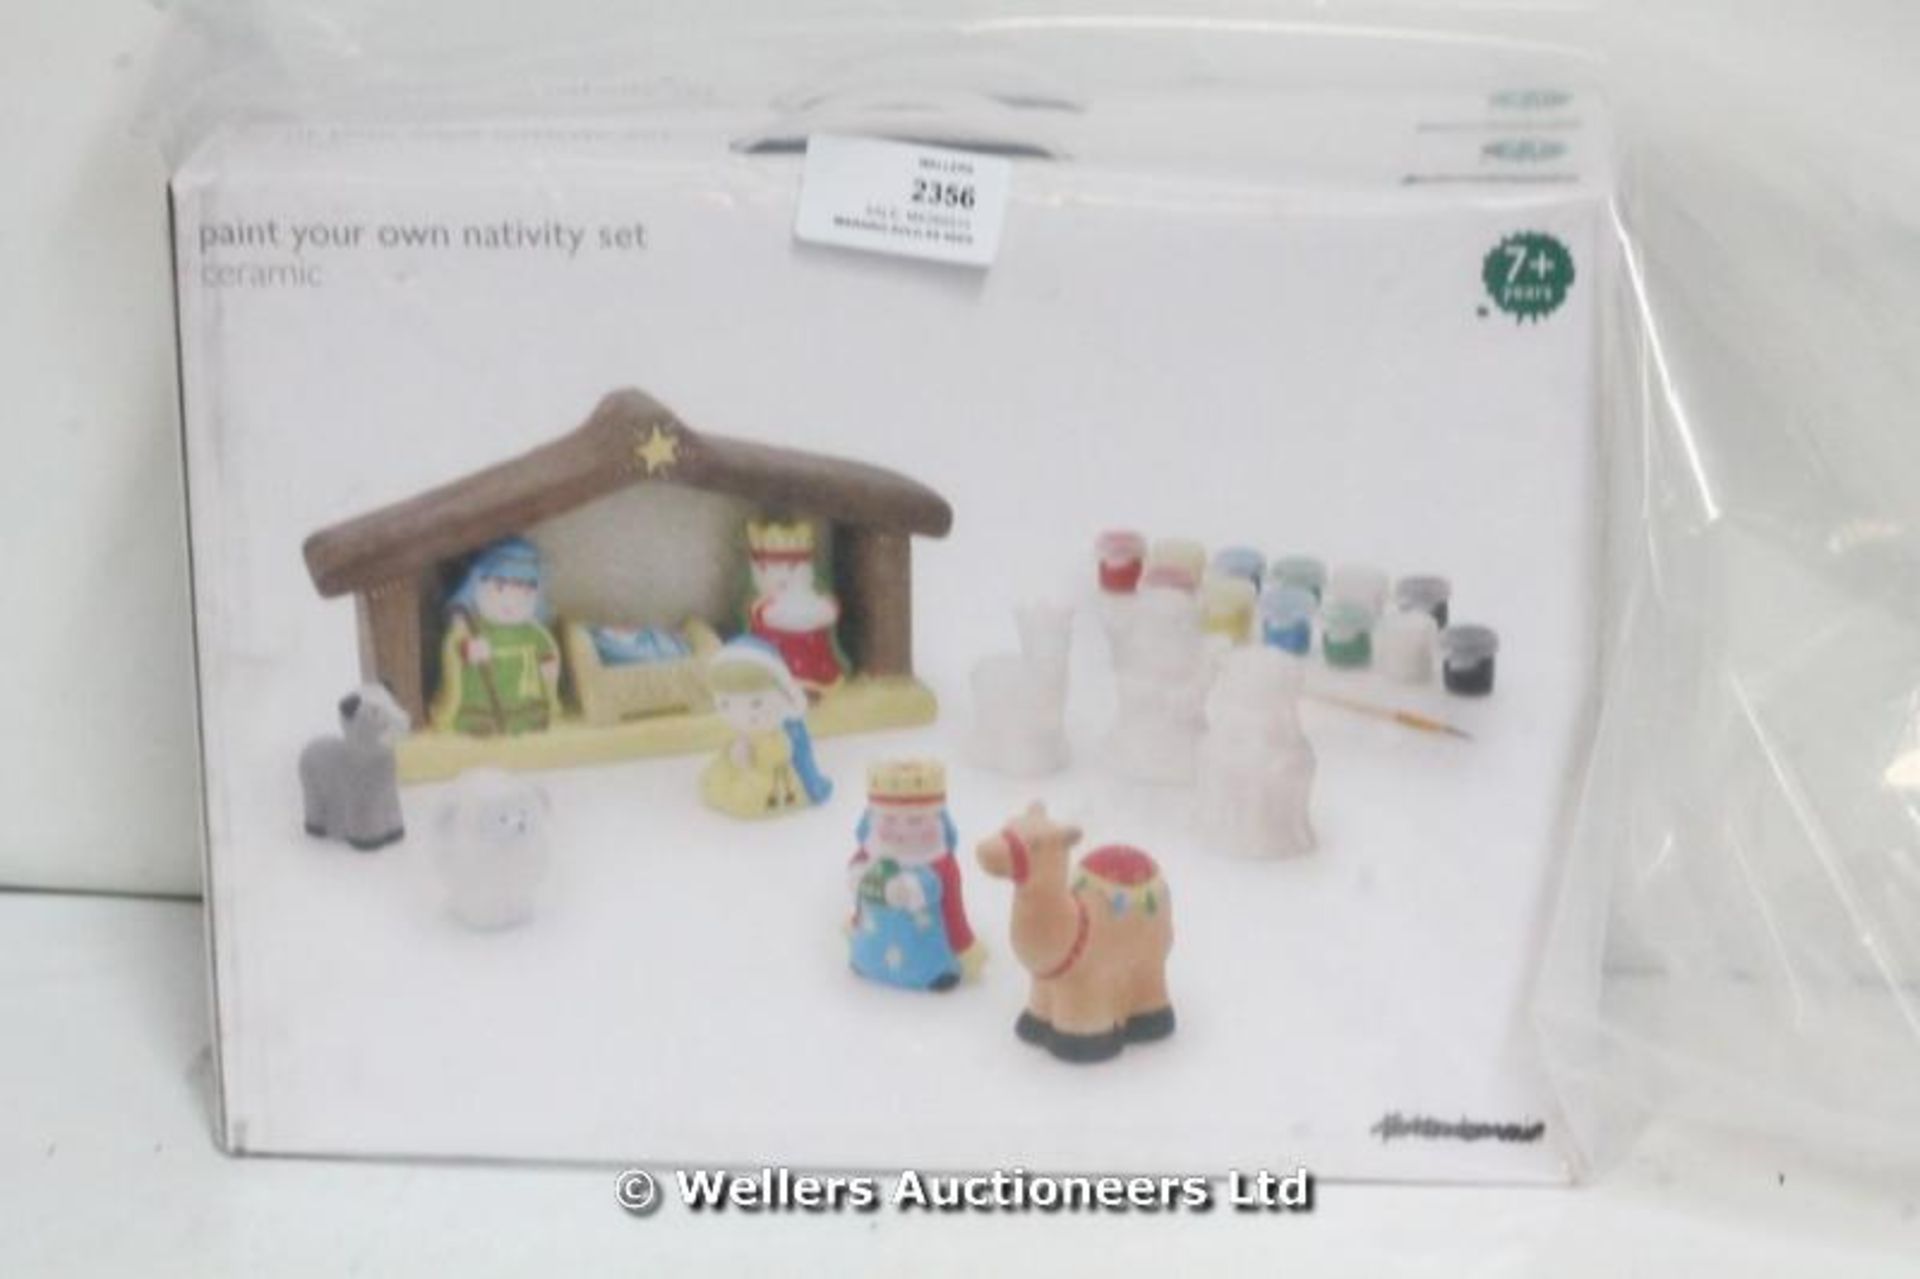 *X2 PAINT YOUR OWN NATIVITY SET / GRADE: NEW / BOXED (DC3) {#1162 [MK260515-2356}